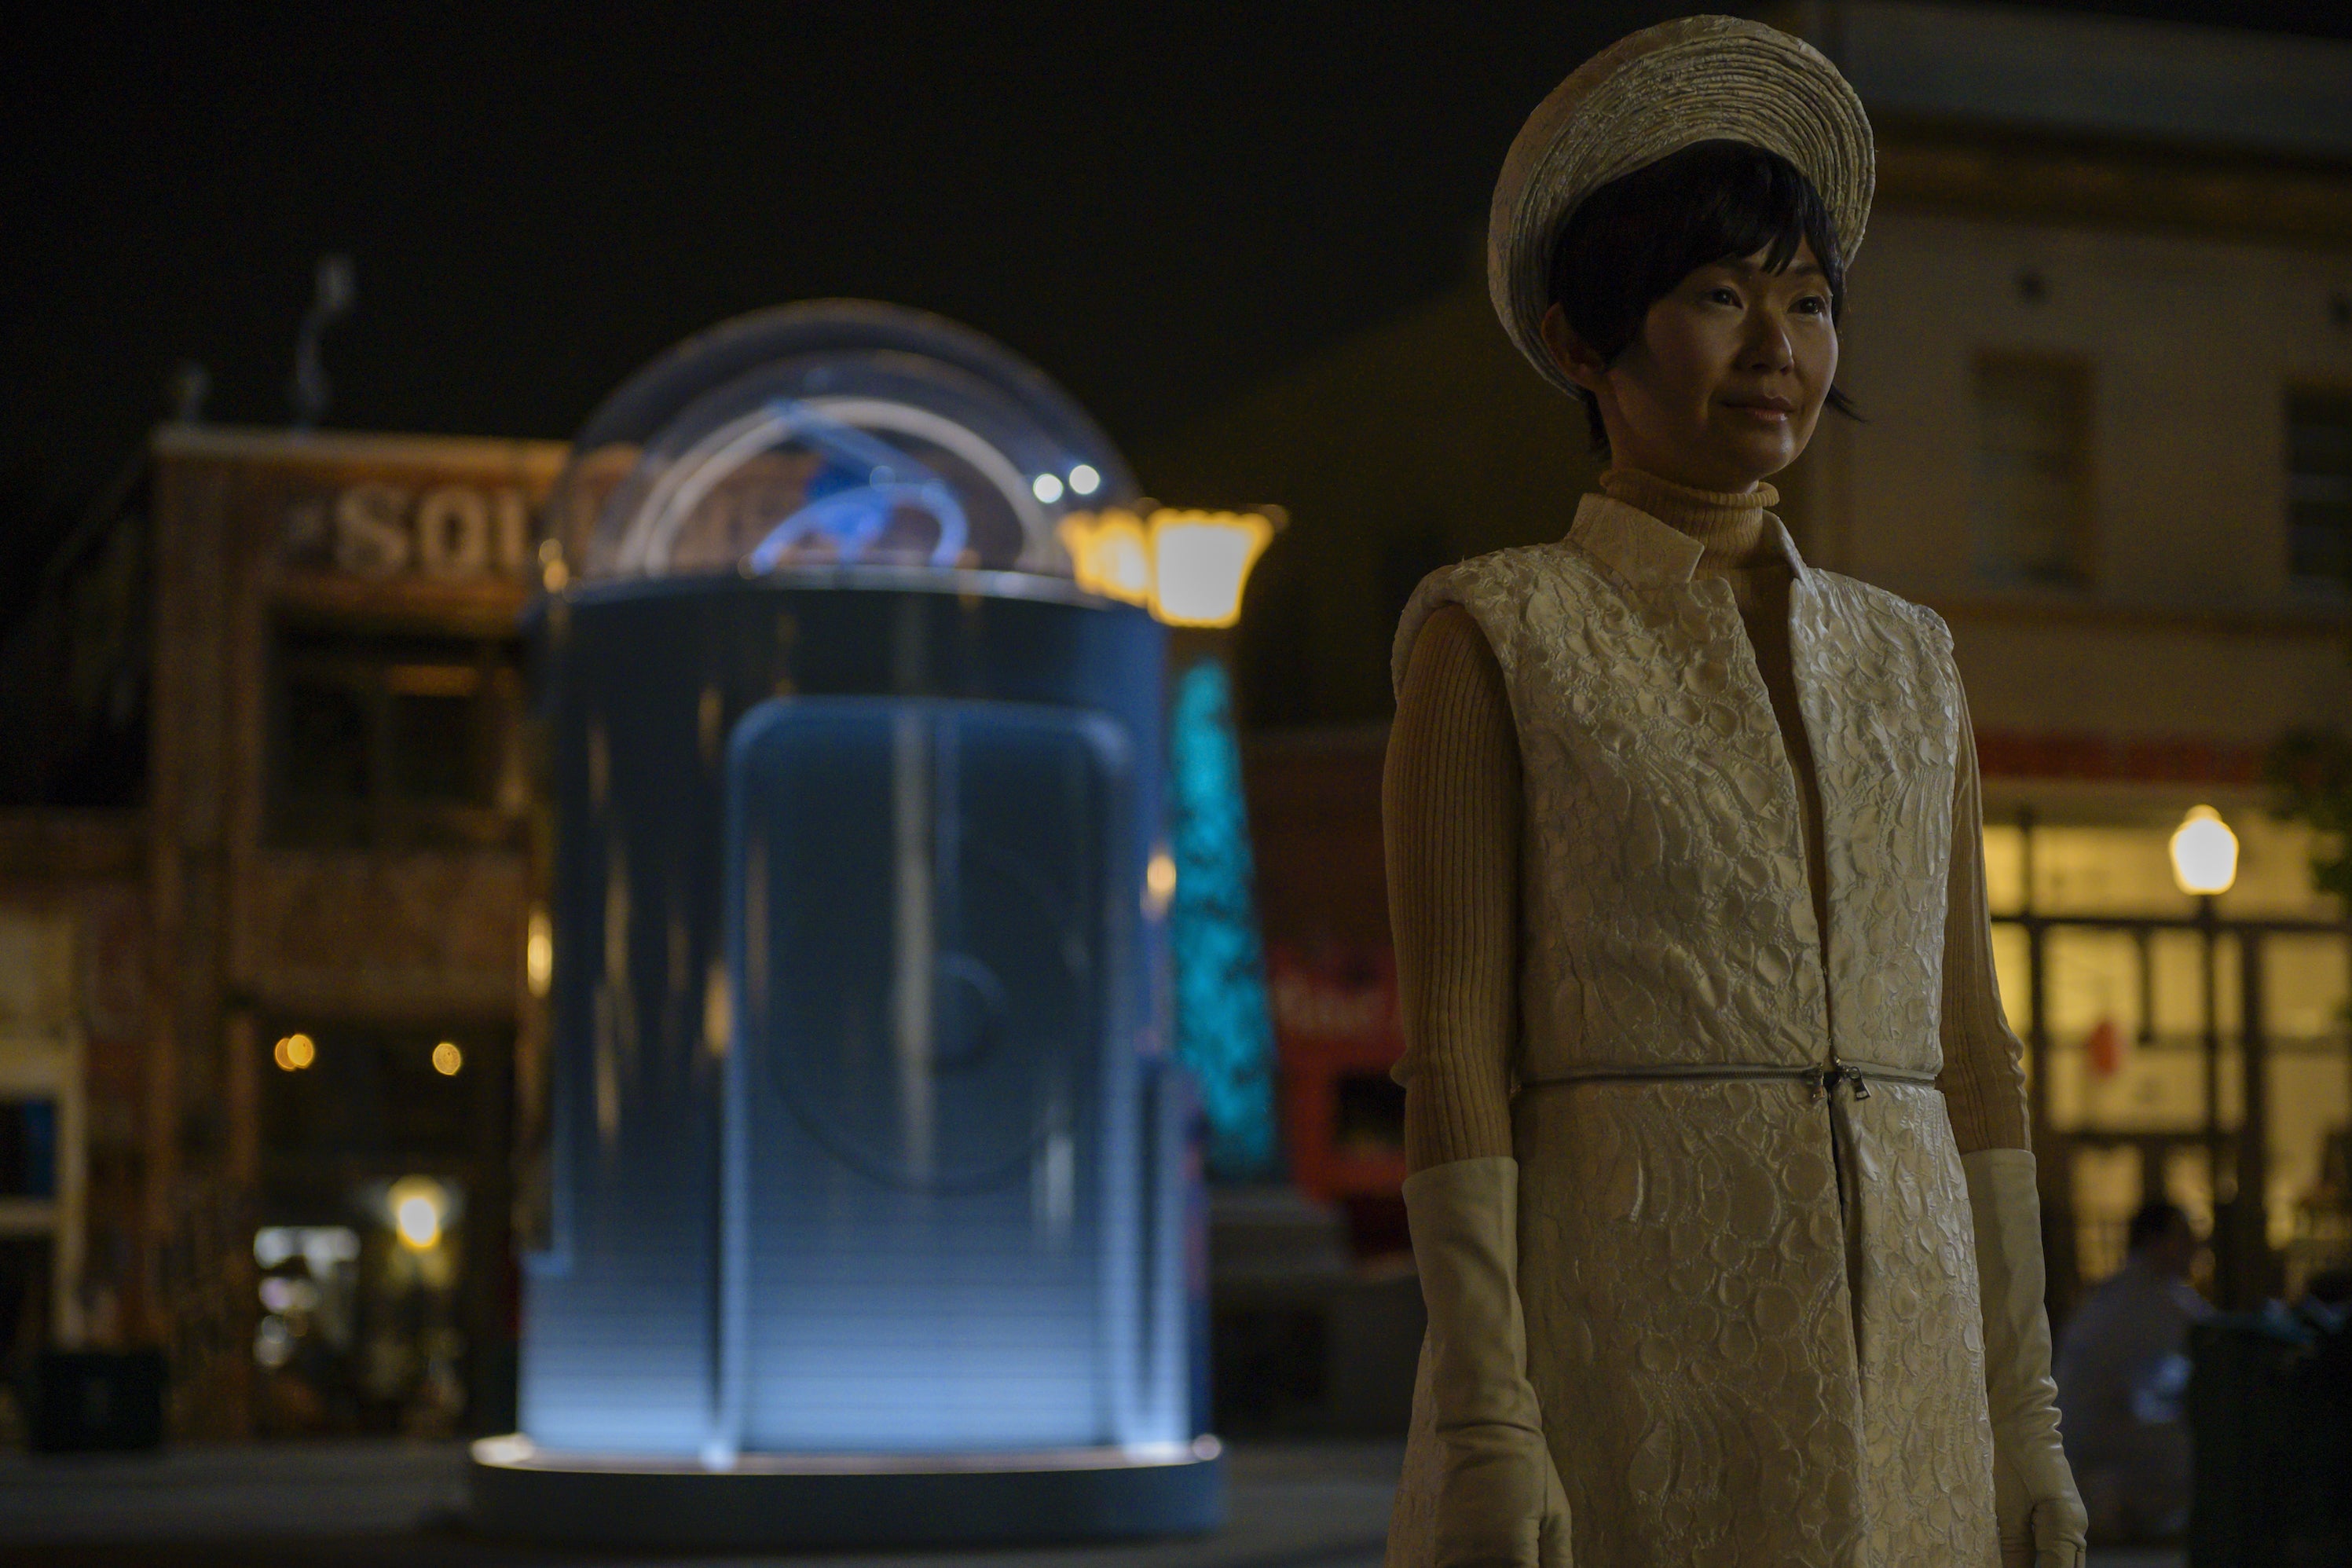 Watchmen's Lady Trieu stands in the town square of Tulsa, a glowing booth behind her.